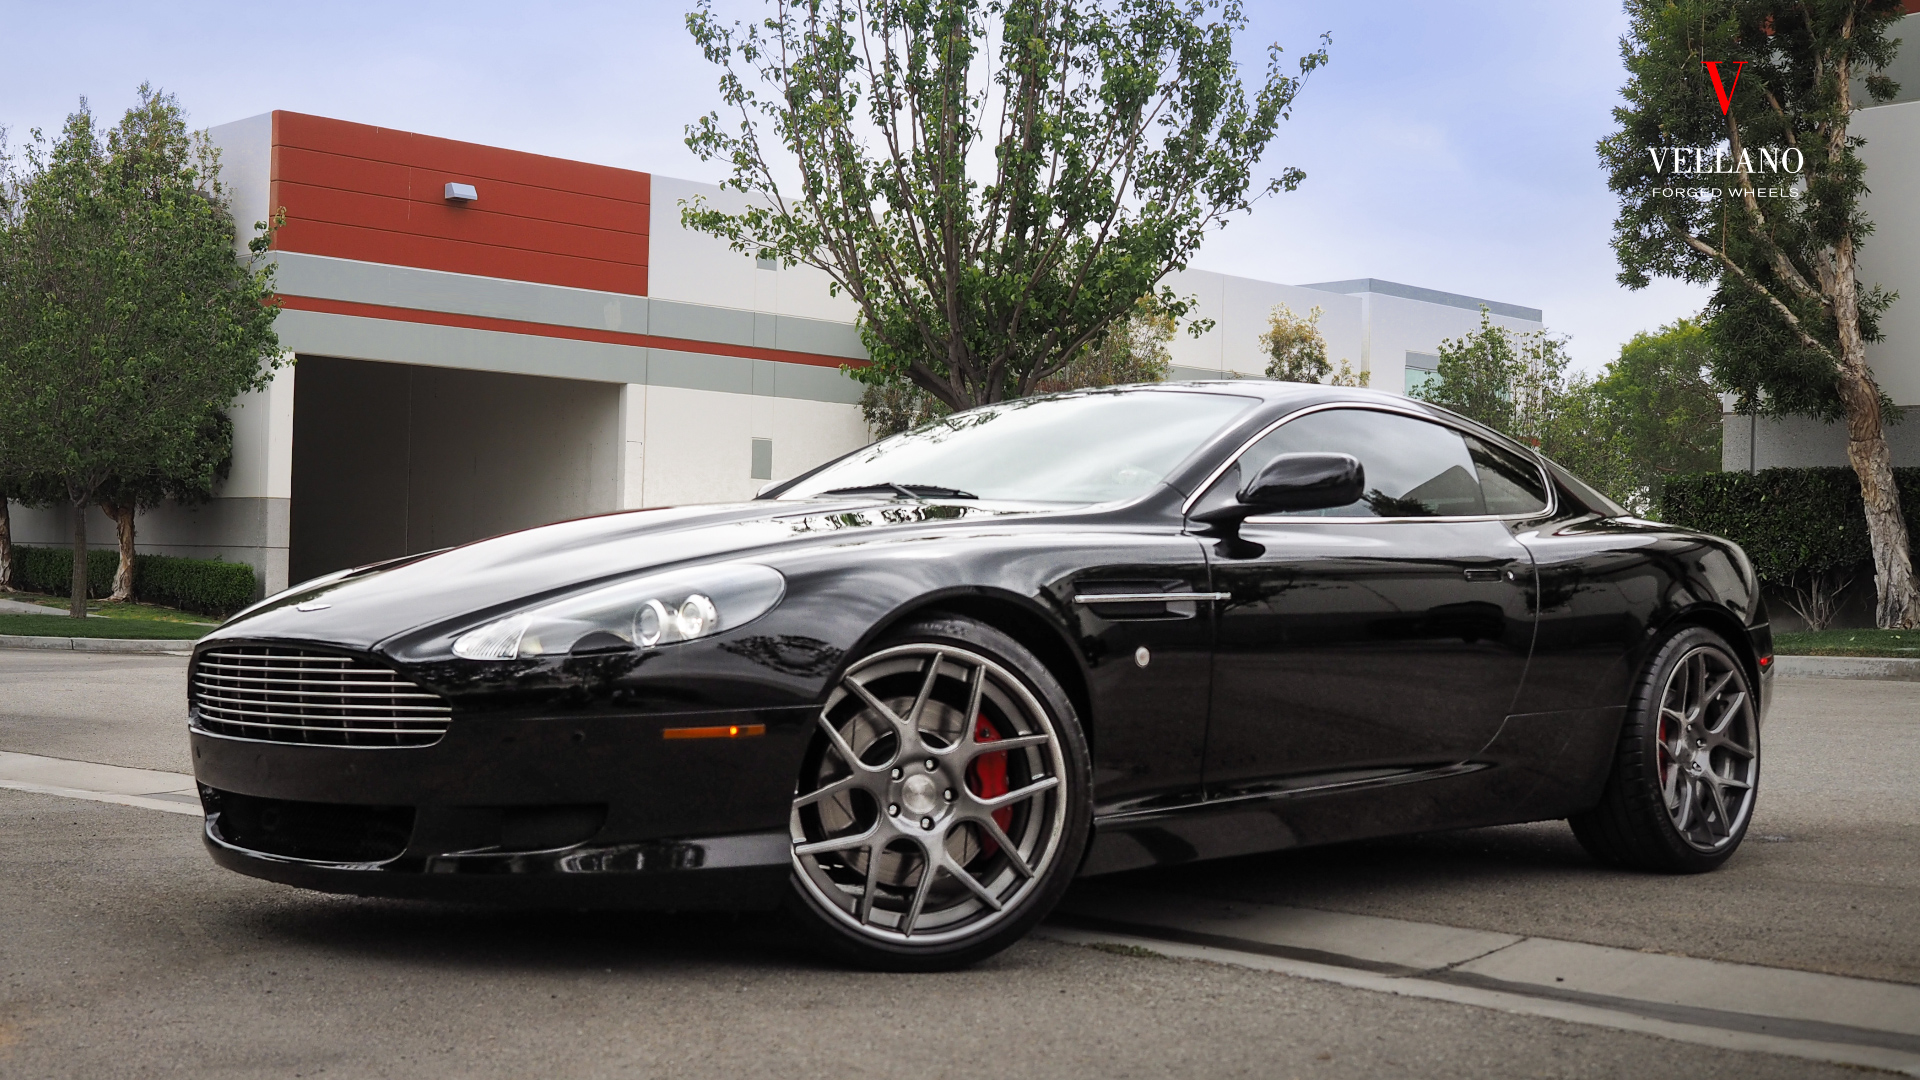 ASTON MARTIN ON VCK CONCAVE